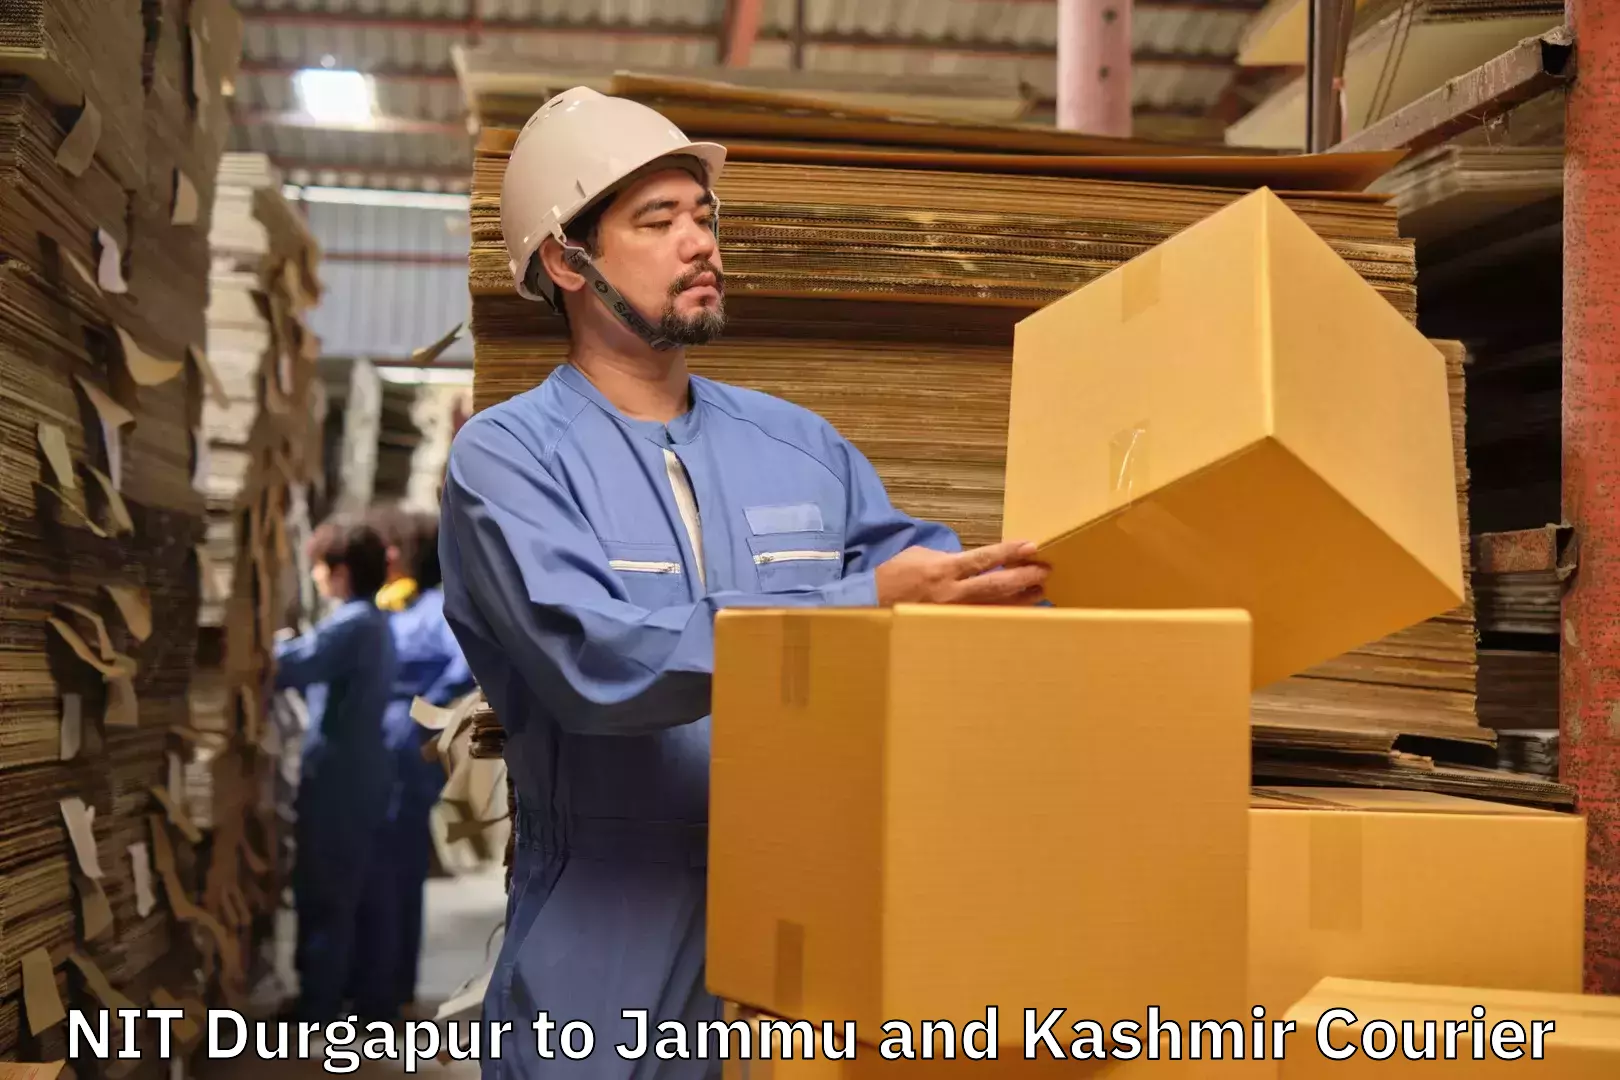 Baggage relocation service NIT Durgapur to Jammu and Kashmir